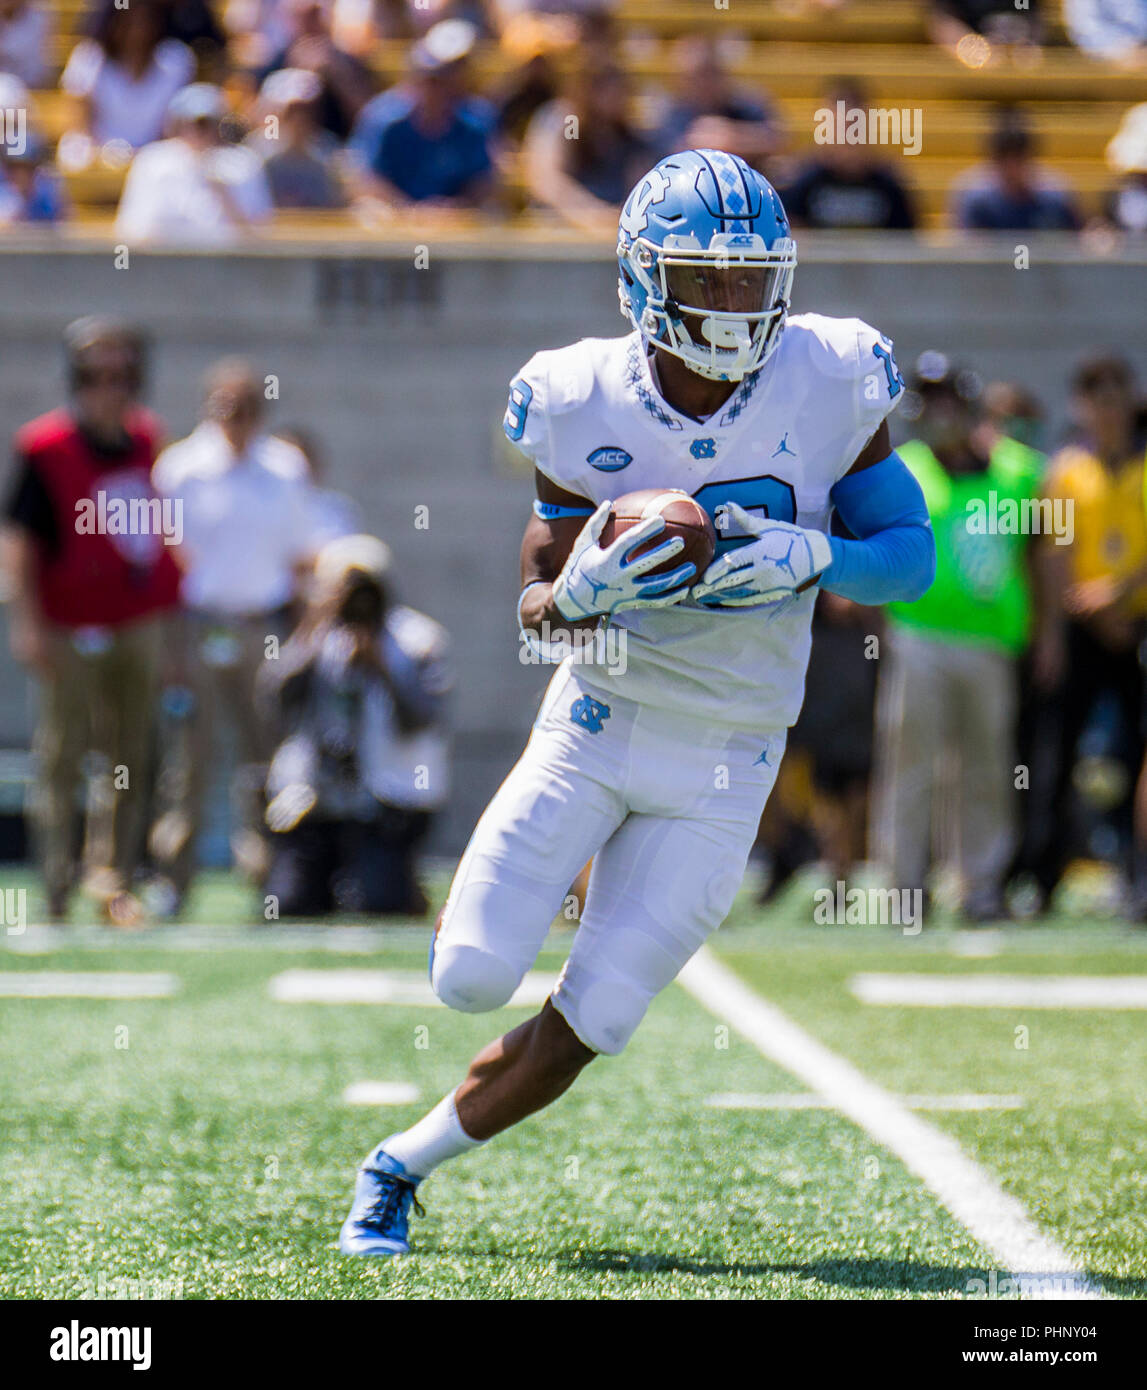 California Memorial Stadium 01st Sep 18 U S A North Carolina Wide Receiver Dazz Newsome 19 Breaks To The Outside For A Short Gain During The Ncaa Football Game Between North Carolina Tar Heels